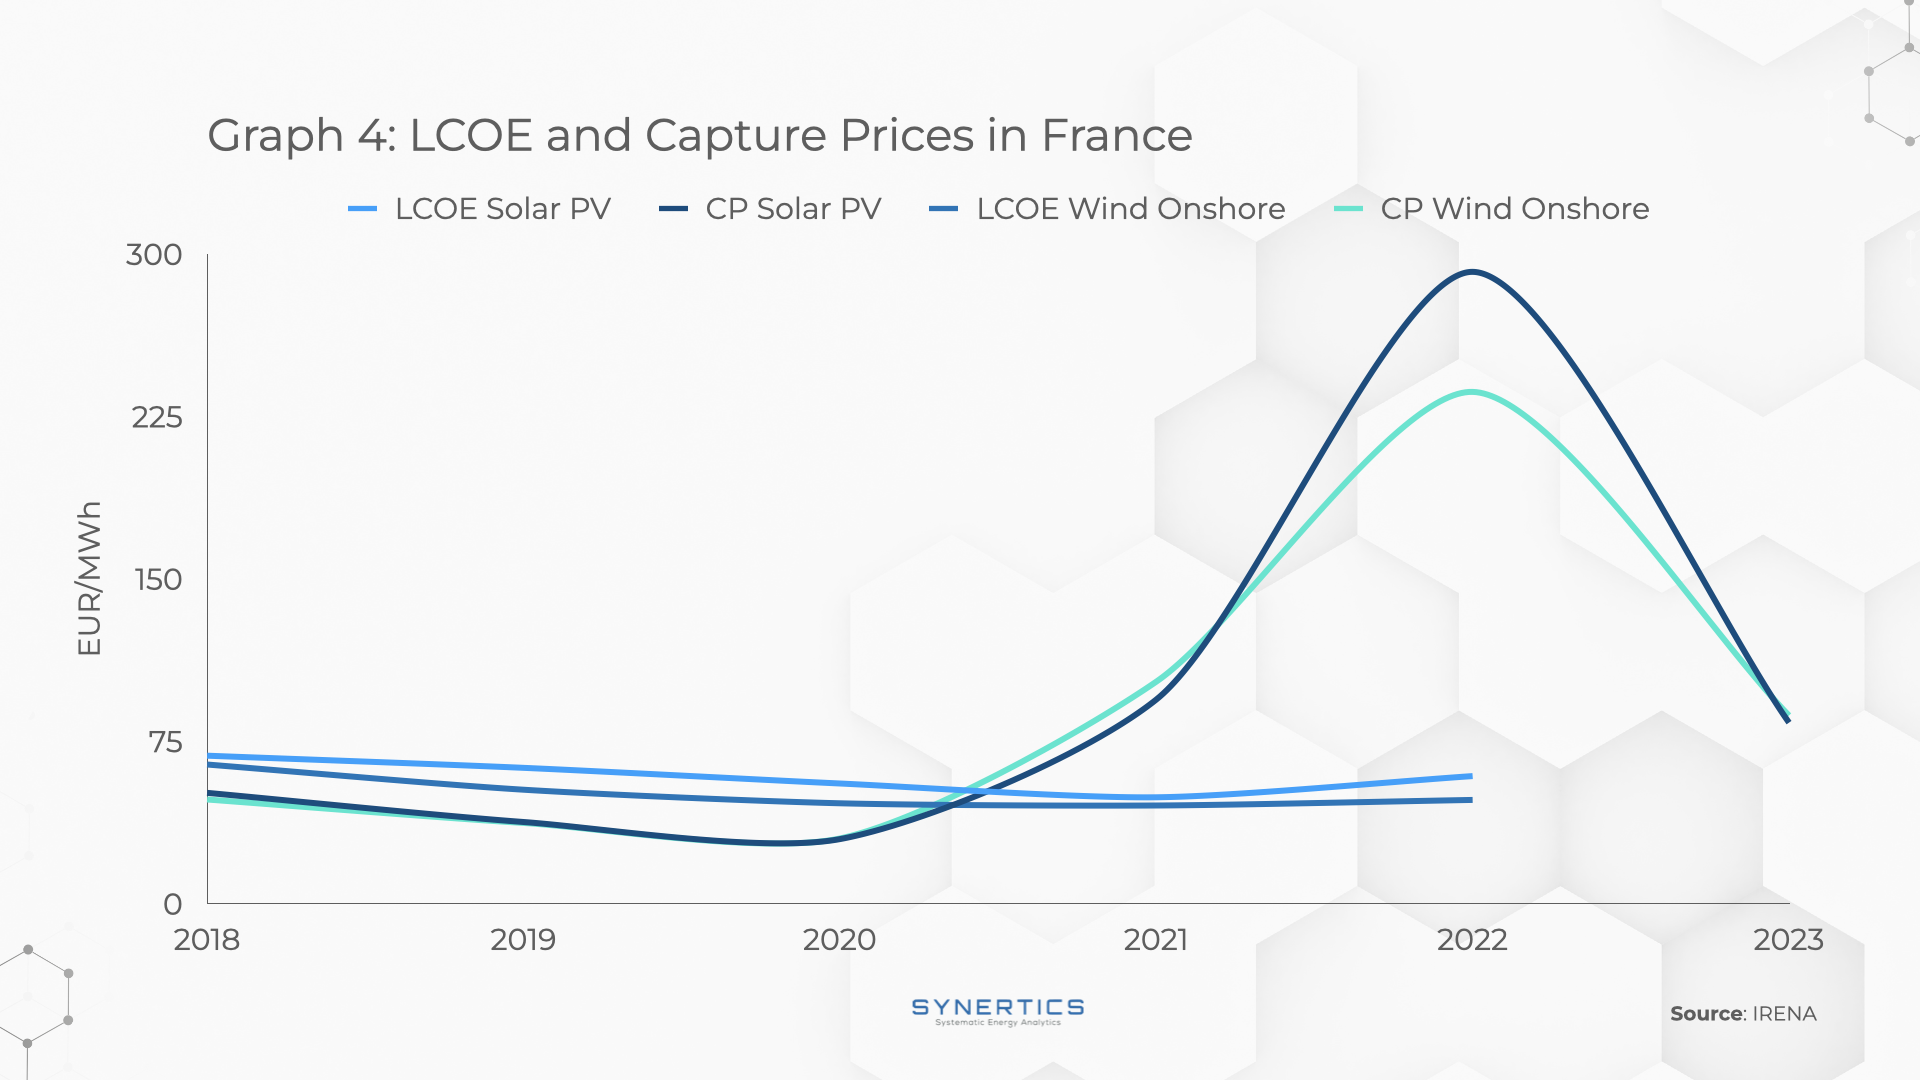 LCOE and Capture Prices in France